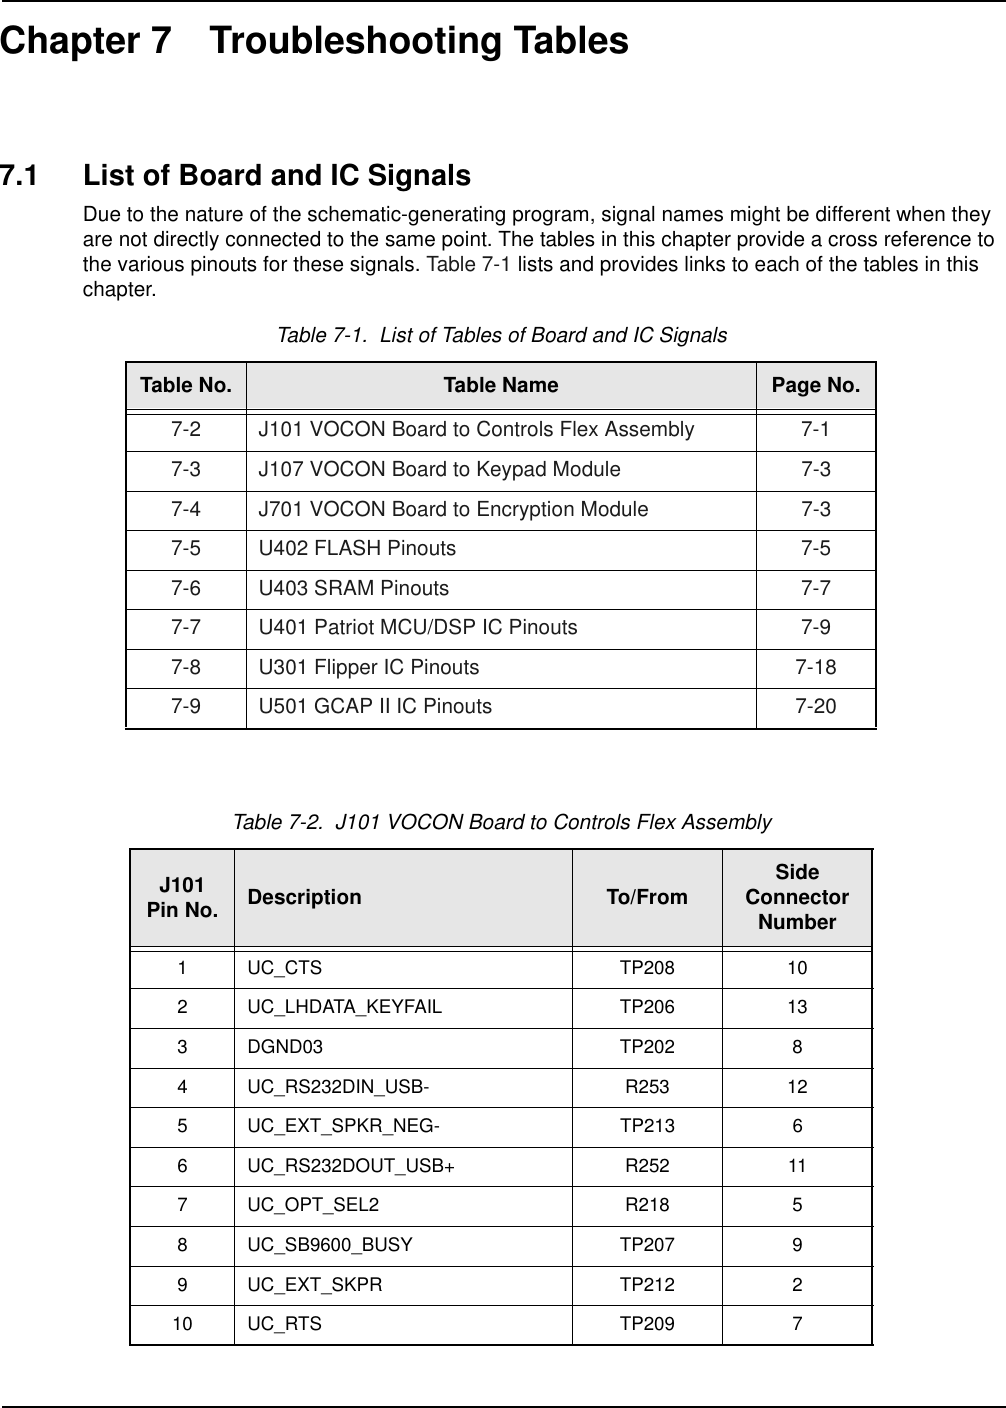 Chapter 7 Troubleshooting Tables7.1 List of Board and IC SignalsDue to the nature of the schematic-generating program, signal names might be different when they are not directly connected to the same point. The tables in this chapter provide a cross reference to the various pinouts for these signals. Table 7-1 lists and provides links to each of the tables in this chapter.Table 7-1.  List of Tables of Board and IC SignalsTable No. Table Name Page No.7-2 J101 VOCON Board to Controls Flex Assembly 7-17-3 J107 VOCON Board to Keypad Module 7-37-4 J701 VOCON Board to Encryption Module 7-37-5 U402 FLASH Pinouts 7-57-6 U403 SRAM Pinouts 7-77-7 U401 Patriot MCU/DSP IC Pinouts 7-97-8 U301 Flipper IC Pinouts 7-187-9 U501 GCAP II IC Pinouts 7-20Table 7-2.  J101 VOCON Board to Controls Flex AssemblyJ101Pin No. Description To/From SideConnectorNumber1 UC_CTS TP208 102 UC_LHDATA_KEYFAIL TP206 133 DGND03 TP202 84 UC_RS232DIN_USB- R253 125 UC_EXT_SPKR_NEG- TP213 66 UC_RS232DOUT_USB+ R252 117 UC_OPT_SEL2 R218 58 UC_SB9600_BUSY TP207 99 UC_EXT_SKPR TP212 210 UC_RTS TP209 7